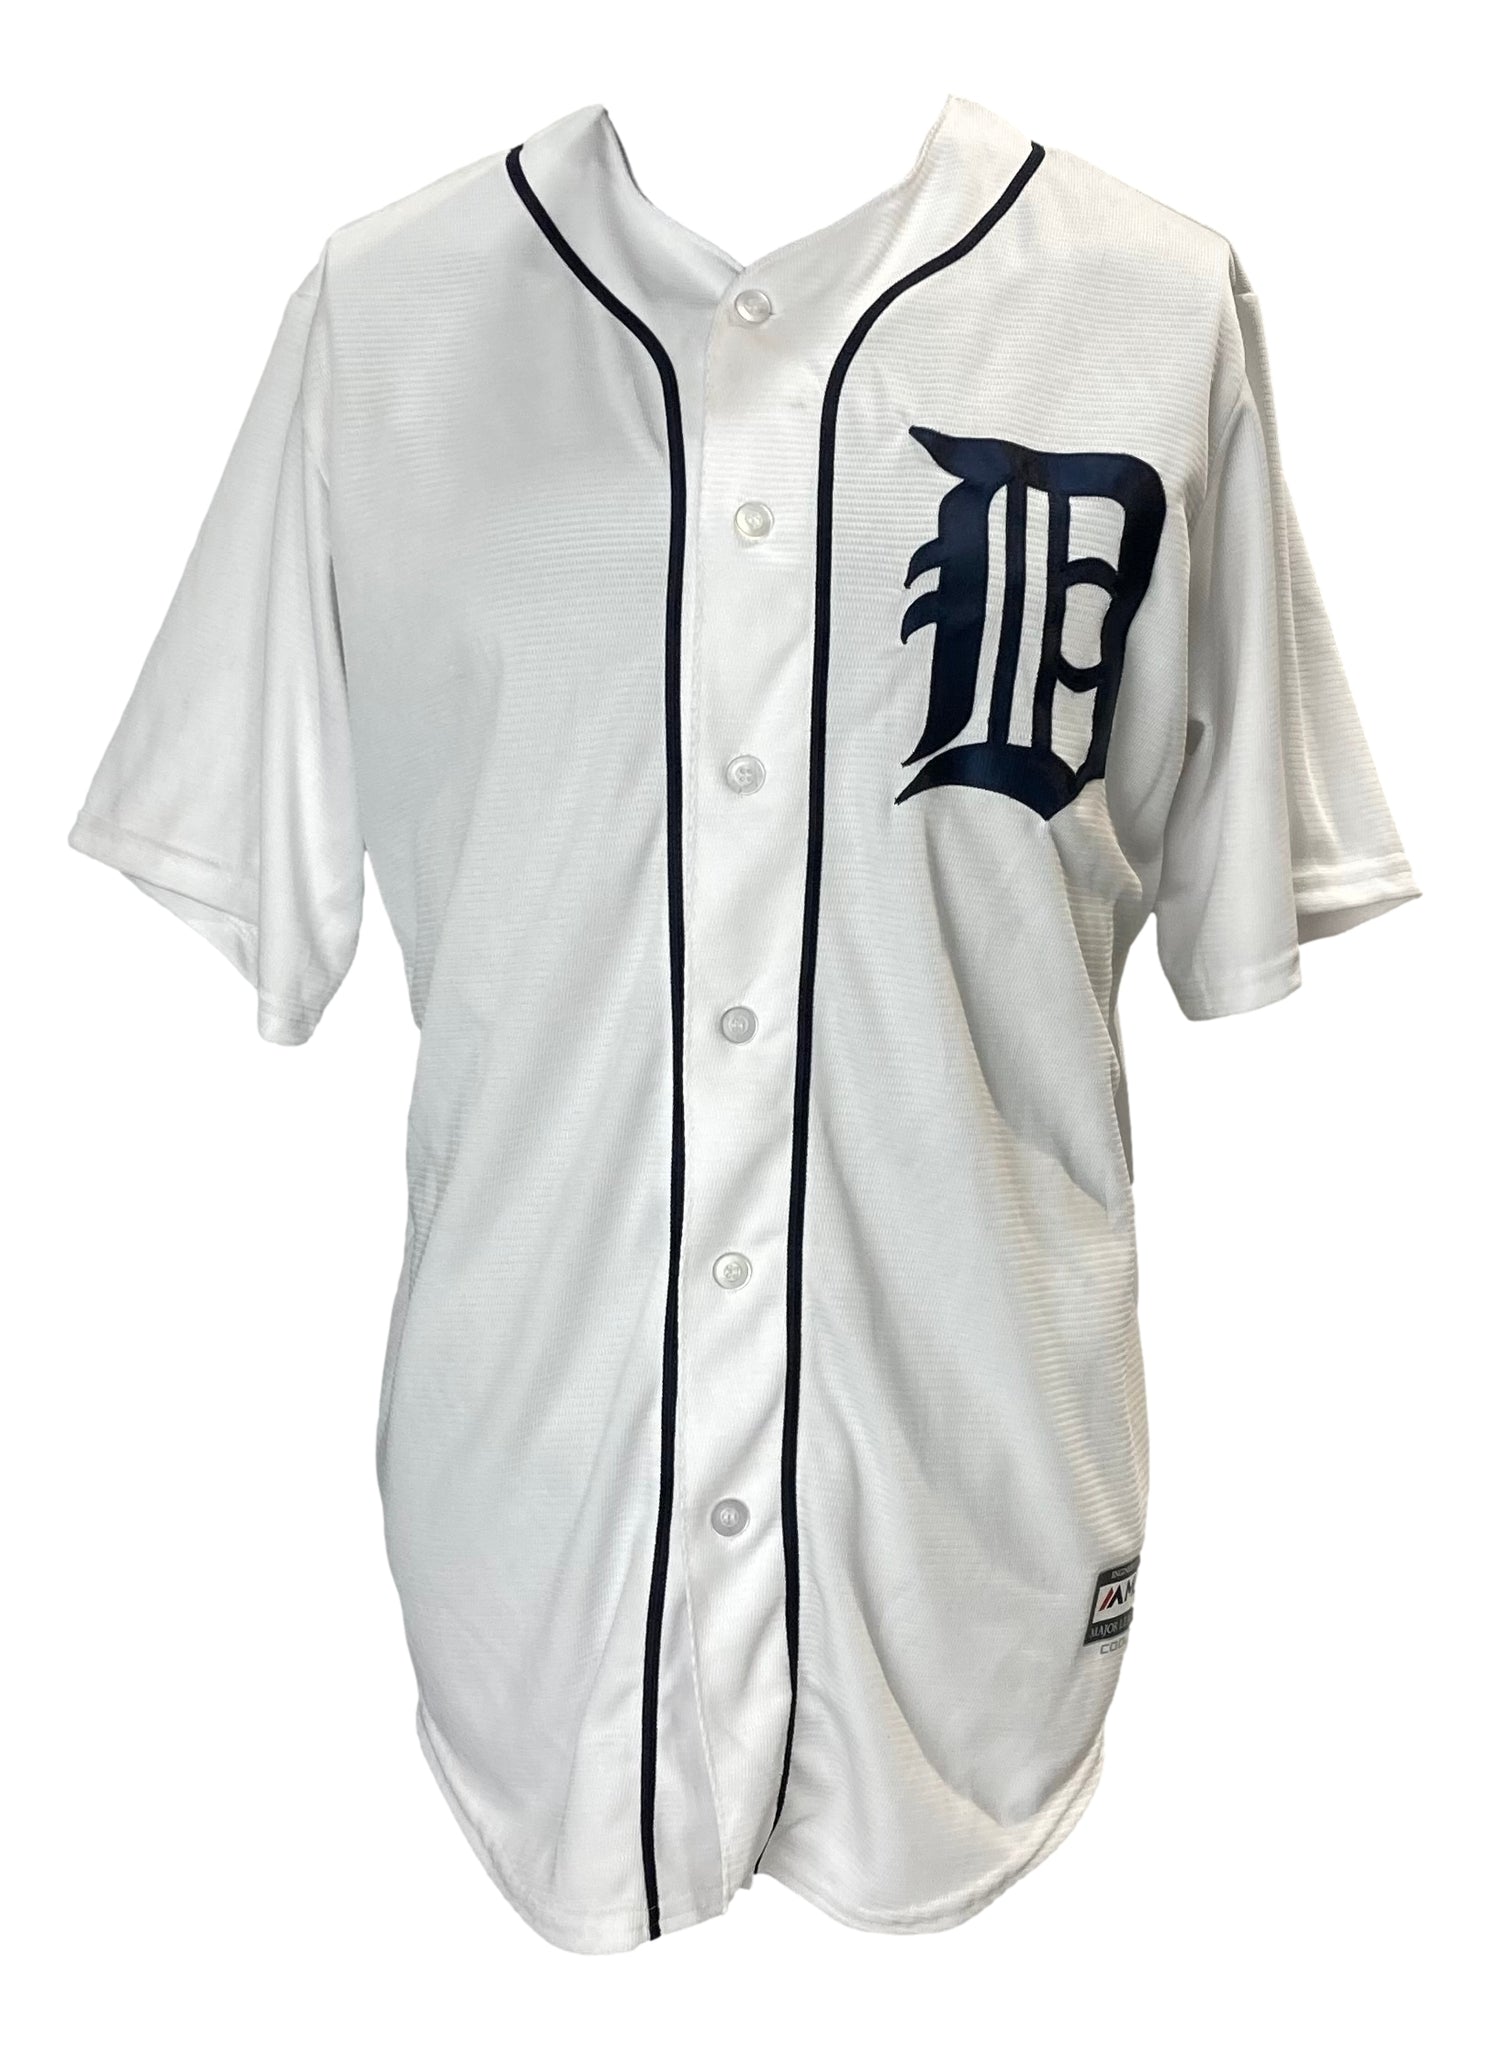 Miguel Cabrera Autographed Detroit Tigers Authentic NWT Majestic